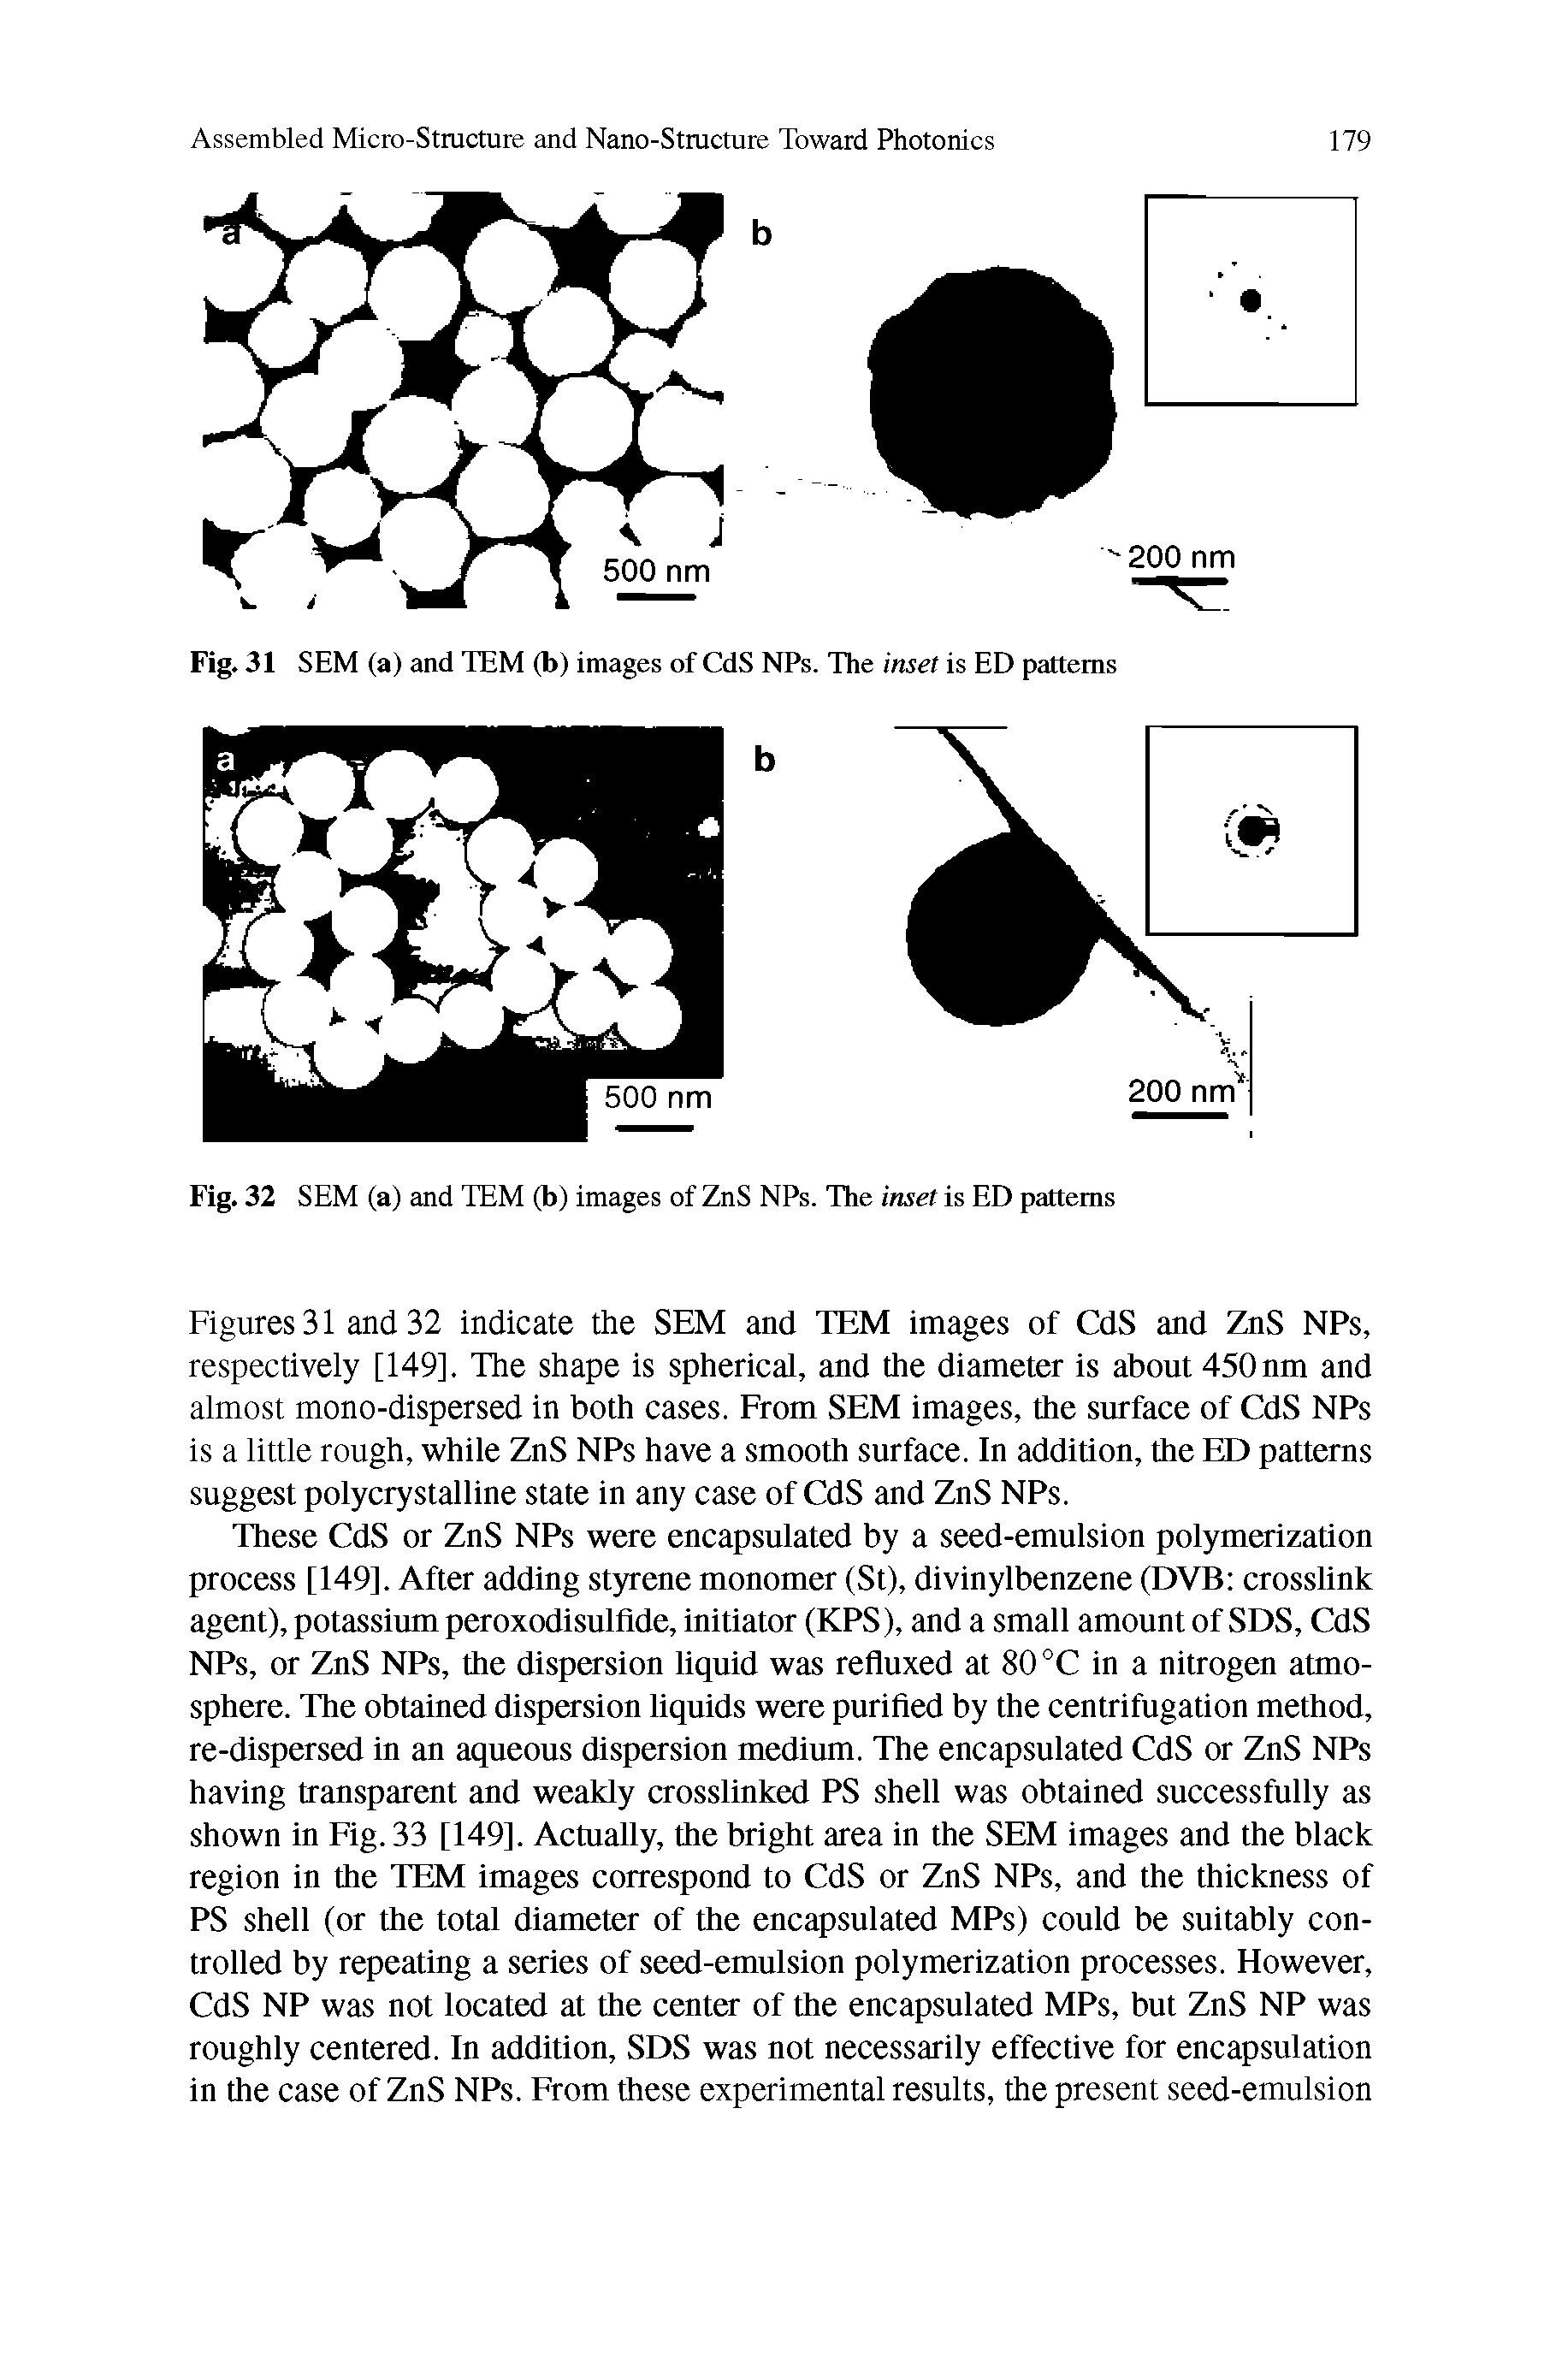 Figures 31 and 32 indicate the SEM and TEM images of CdS and ZnS NPs, respectively [149], The shape is spherical, and the diameter is about 450nm and almost mono-dispersed in both cases. From SEM images, the surface of CdS NPs is a little rough, while ZnS NPs have a smooth surface. In addition, the ED patterns suggest polycrystalline state in any case of CdS and ZnS NPs.